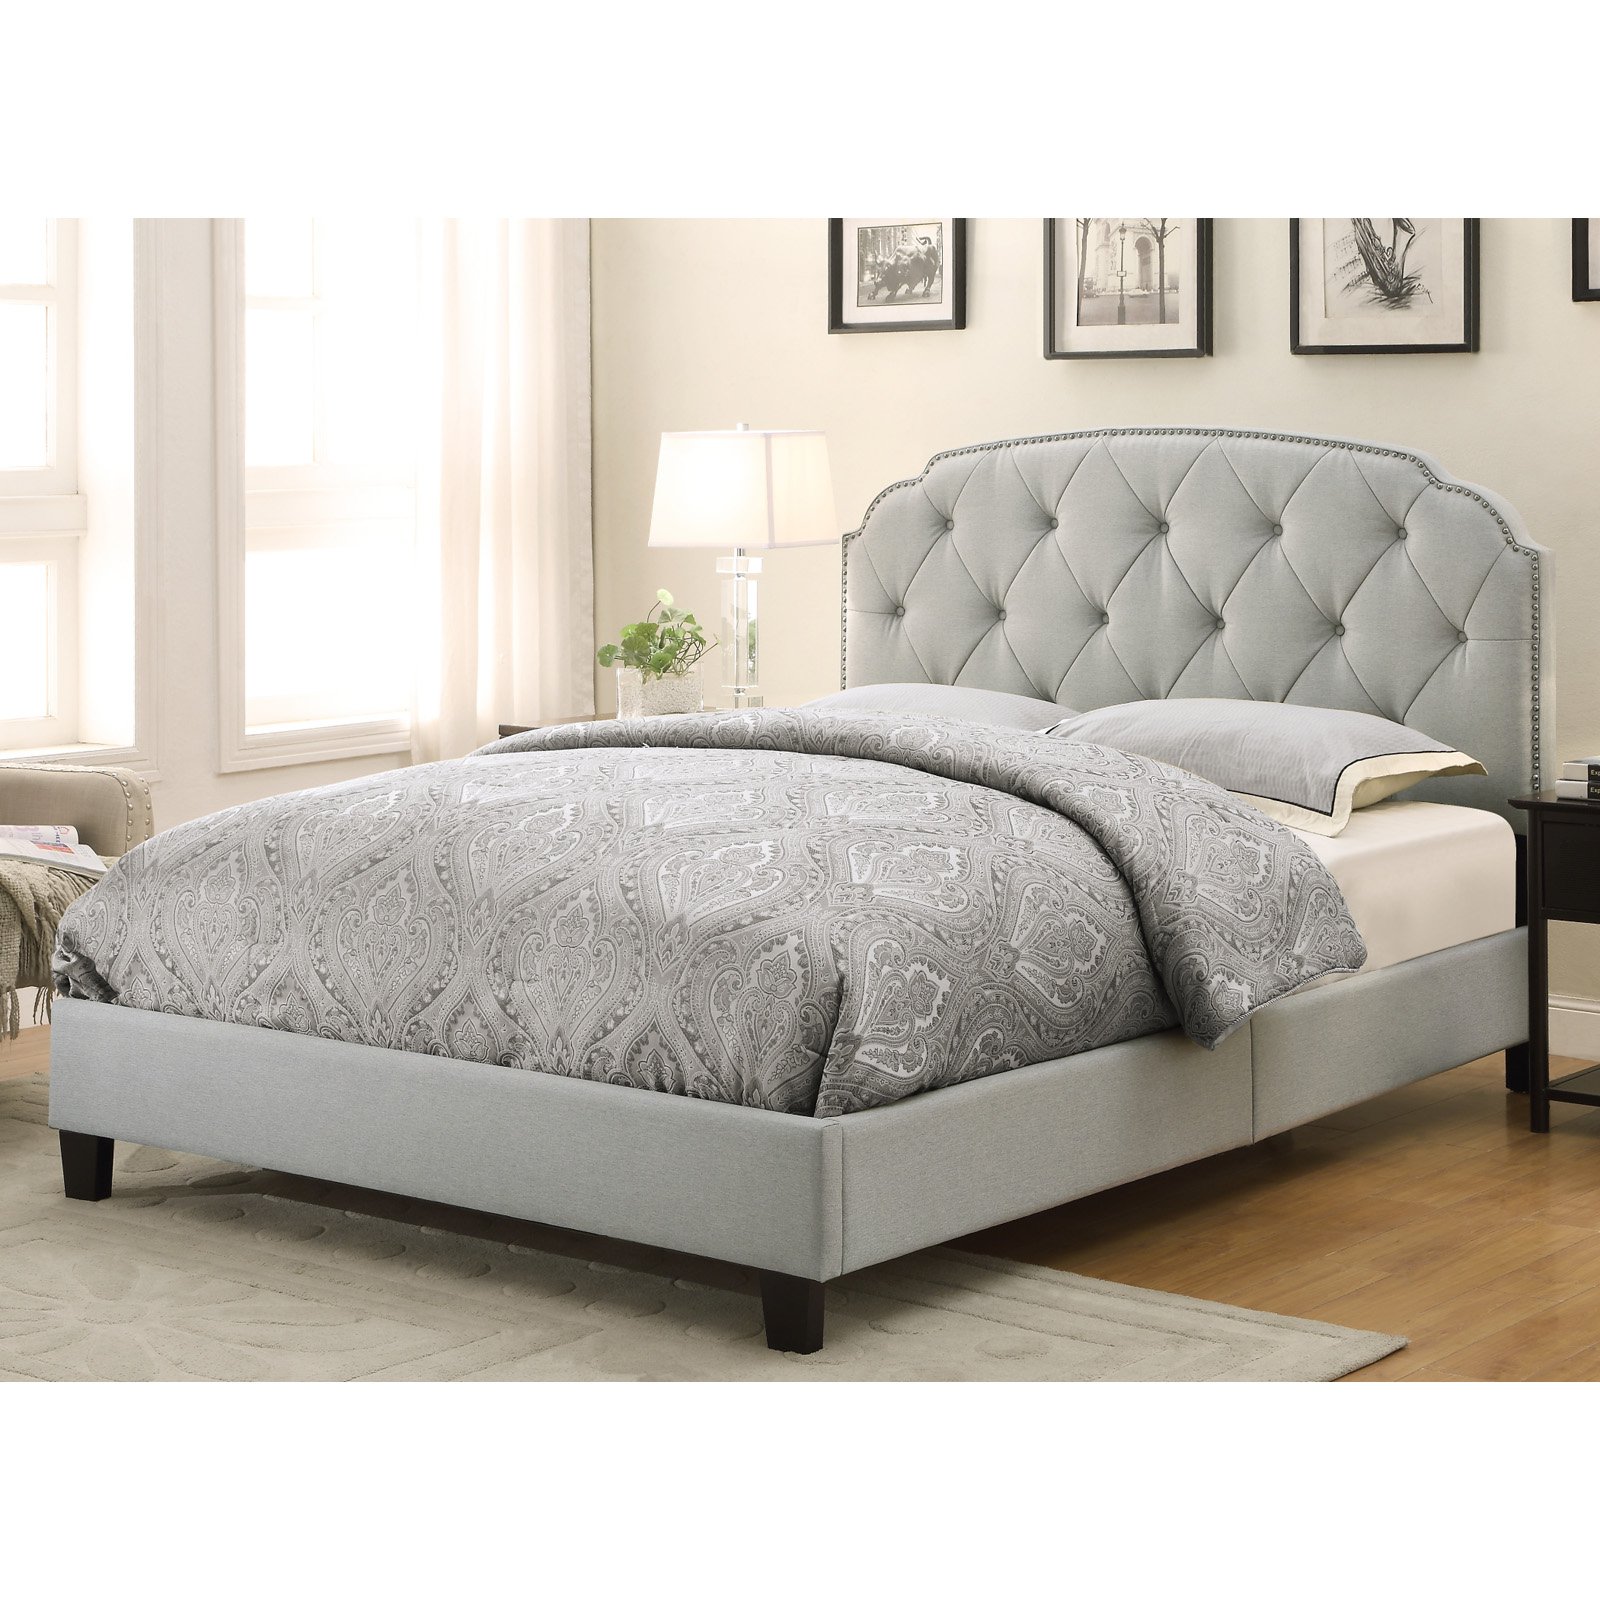 Trespass Marmor Tufted Nail Head Upholstered Bed - Queen - image 2 of 4